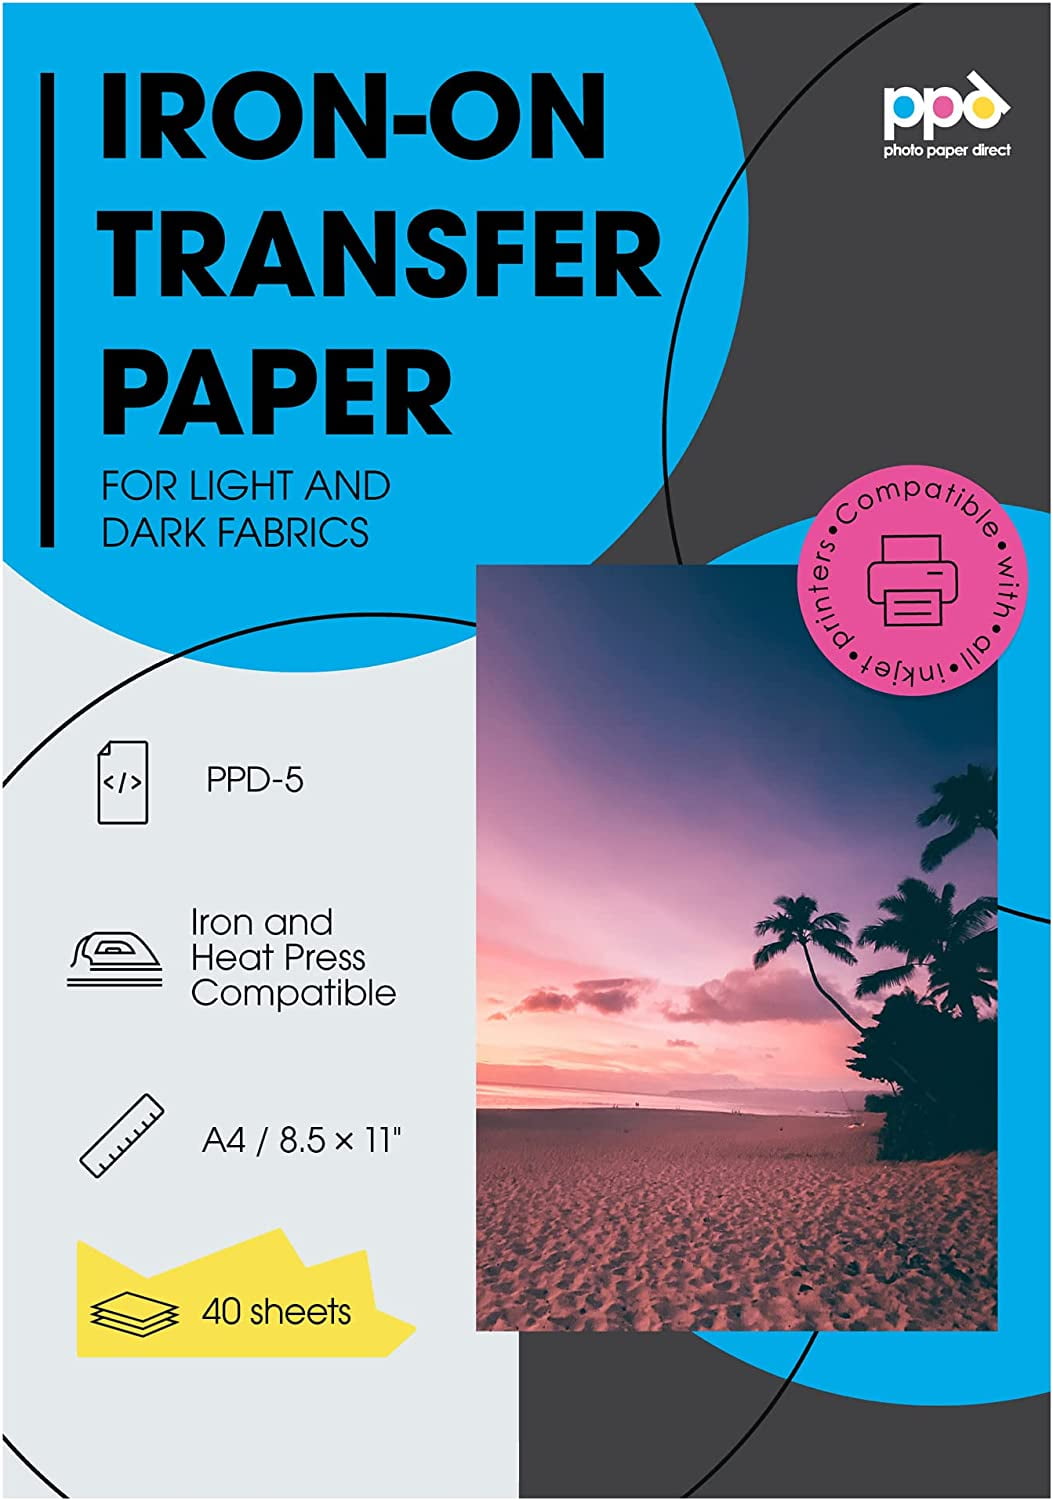 PPD Inkjet Iron-On Mixed Light and Dark Transfer Paper LTR 8.5X11